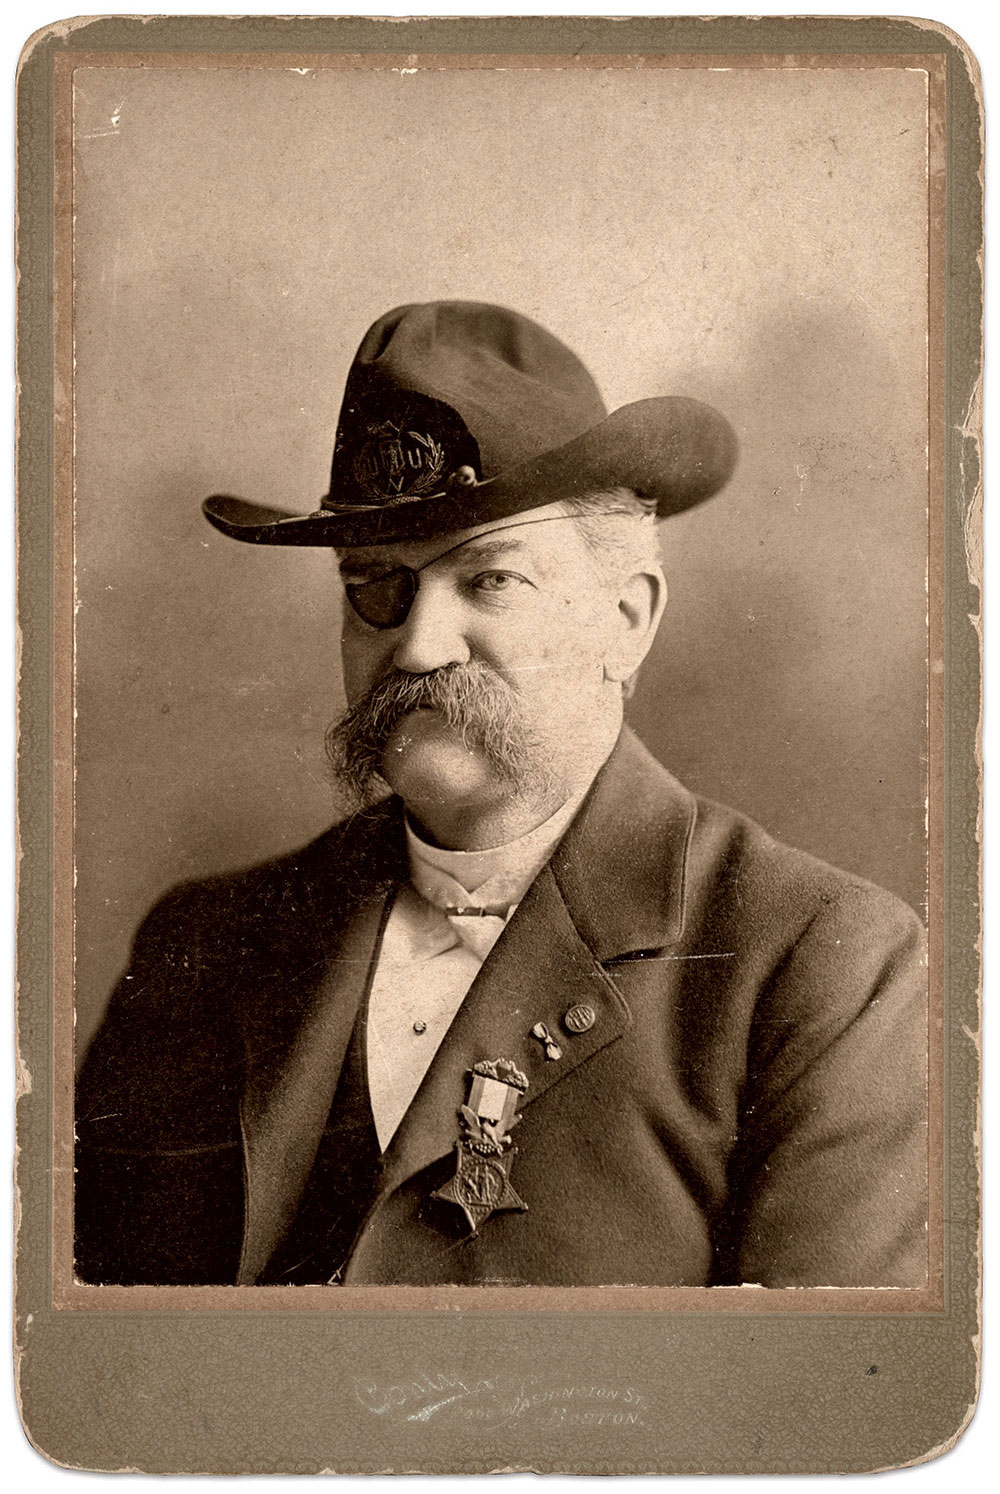 Postwar, circa 1896-1906. Cabinet card by Charles F. Conley of Boston, Mass. The Liljenquist Family Collection at the Library of Congress.